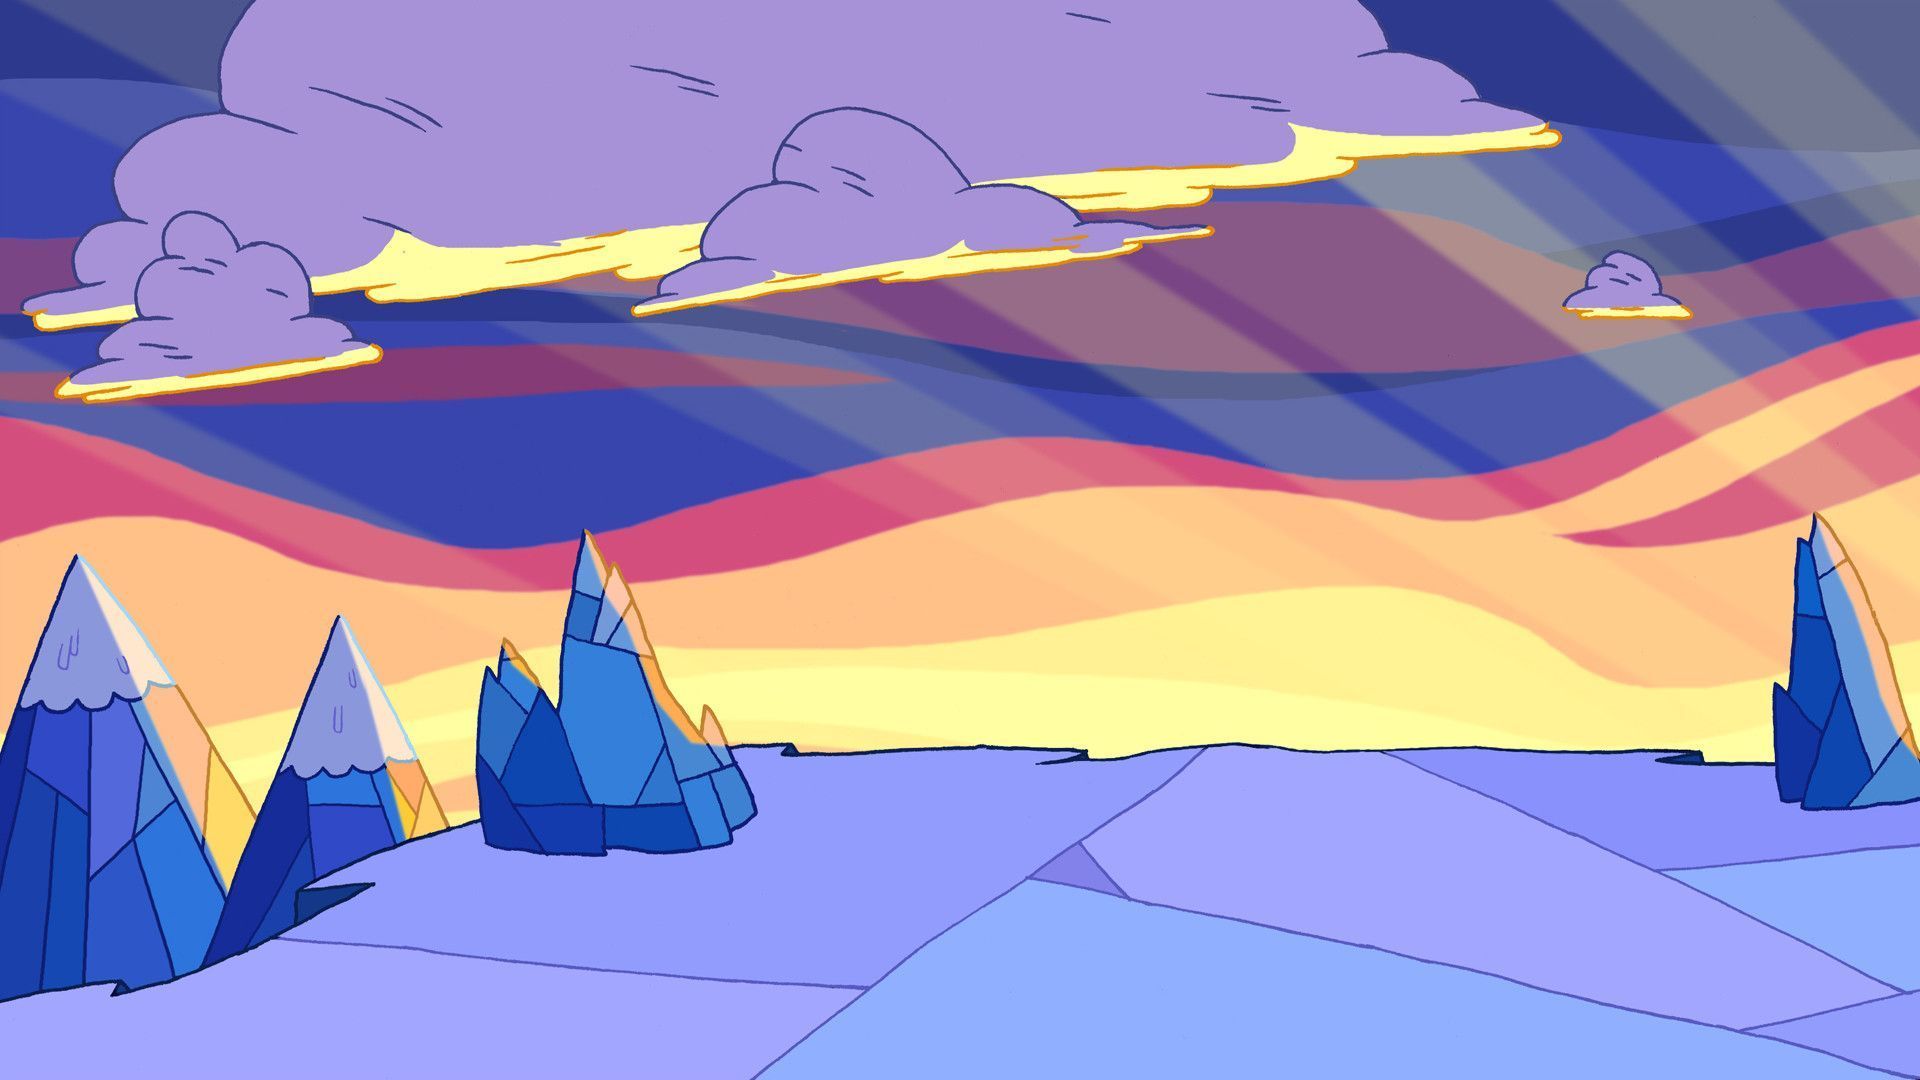 A cartoon landscape with clouds and mountains - Adventure Time